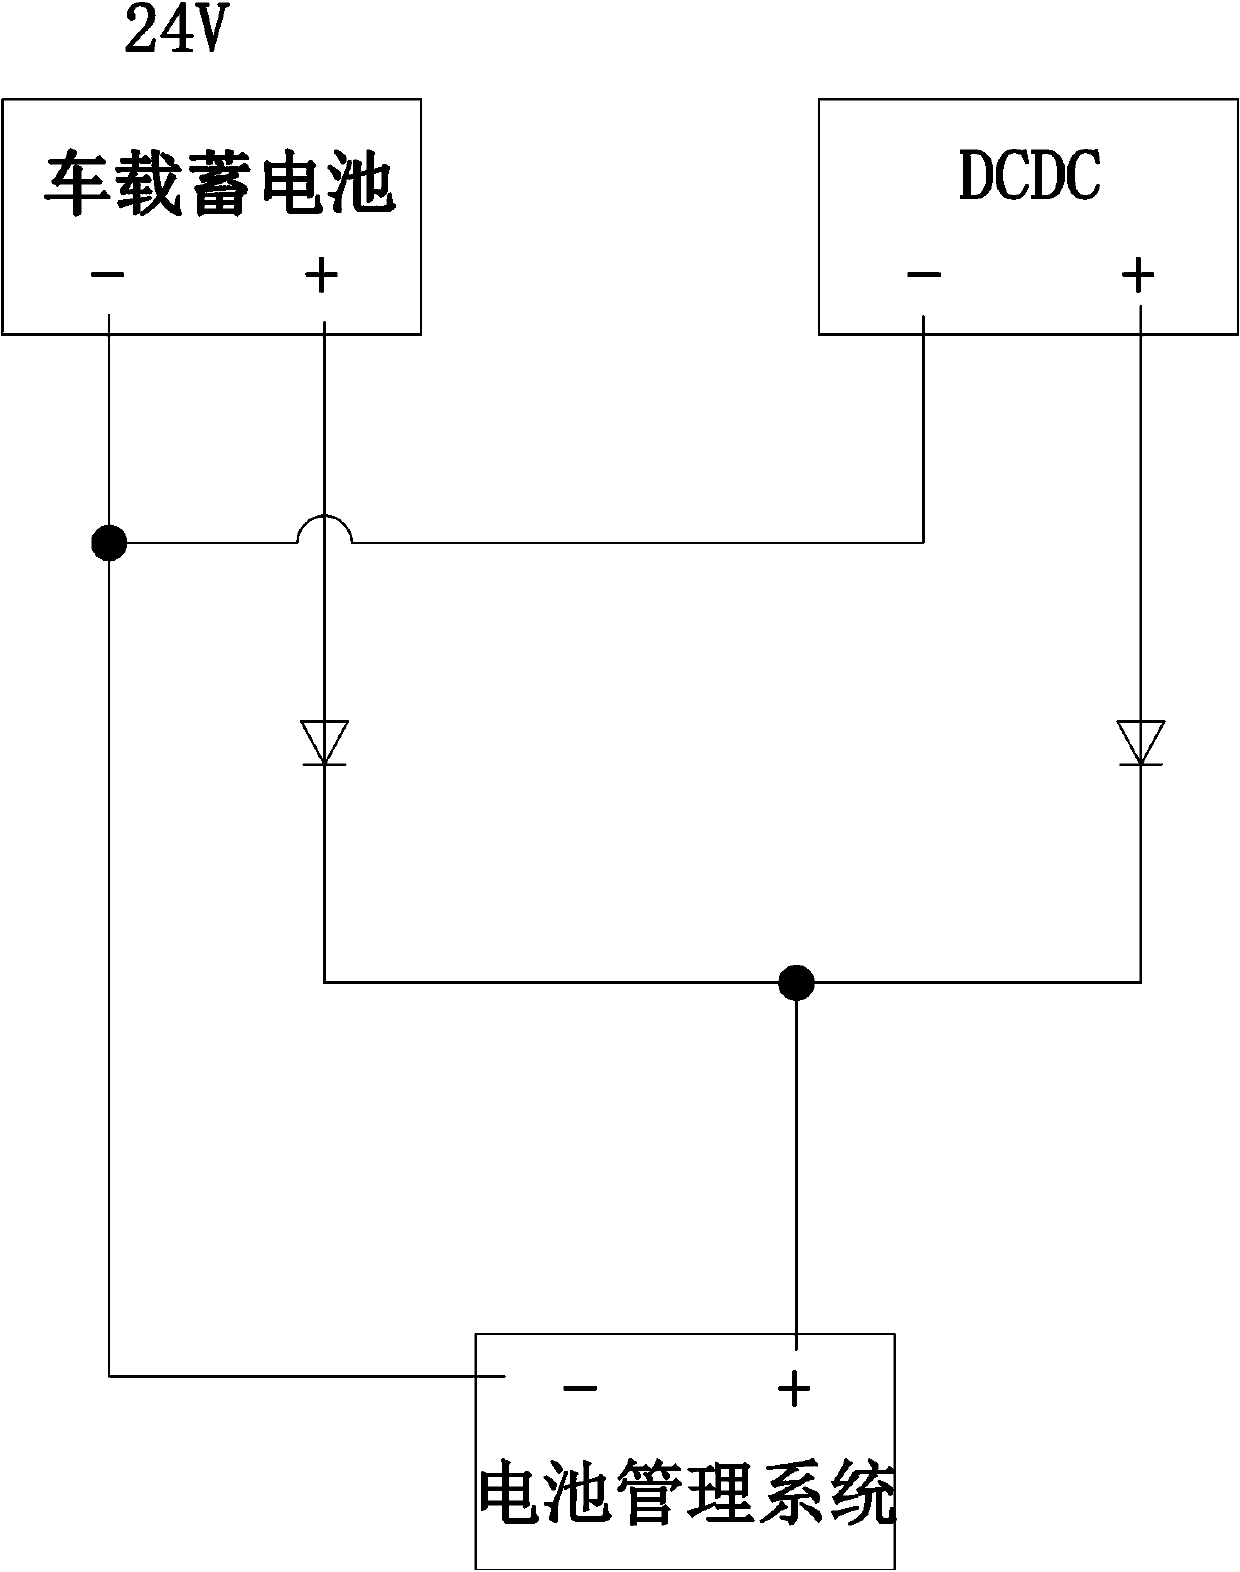 Low-voltage power supply management system for safety monitoring of power battery of electric vehicle